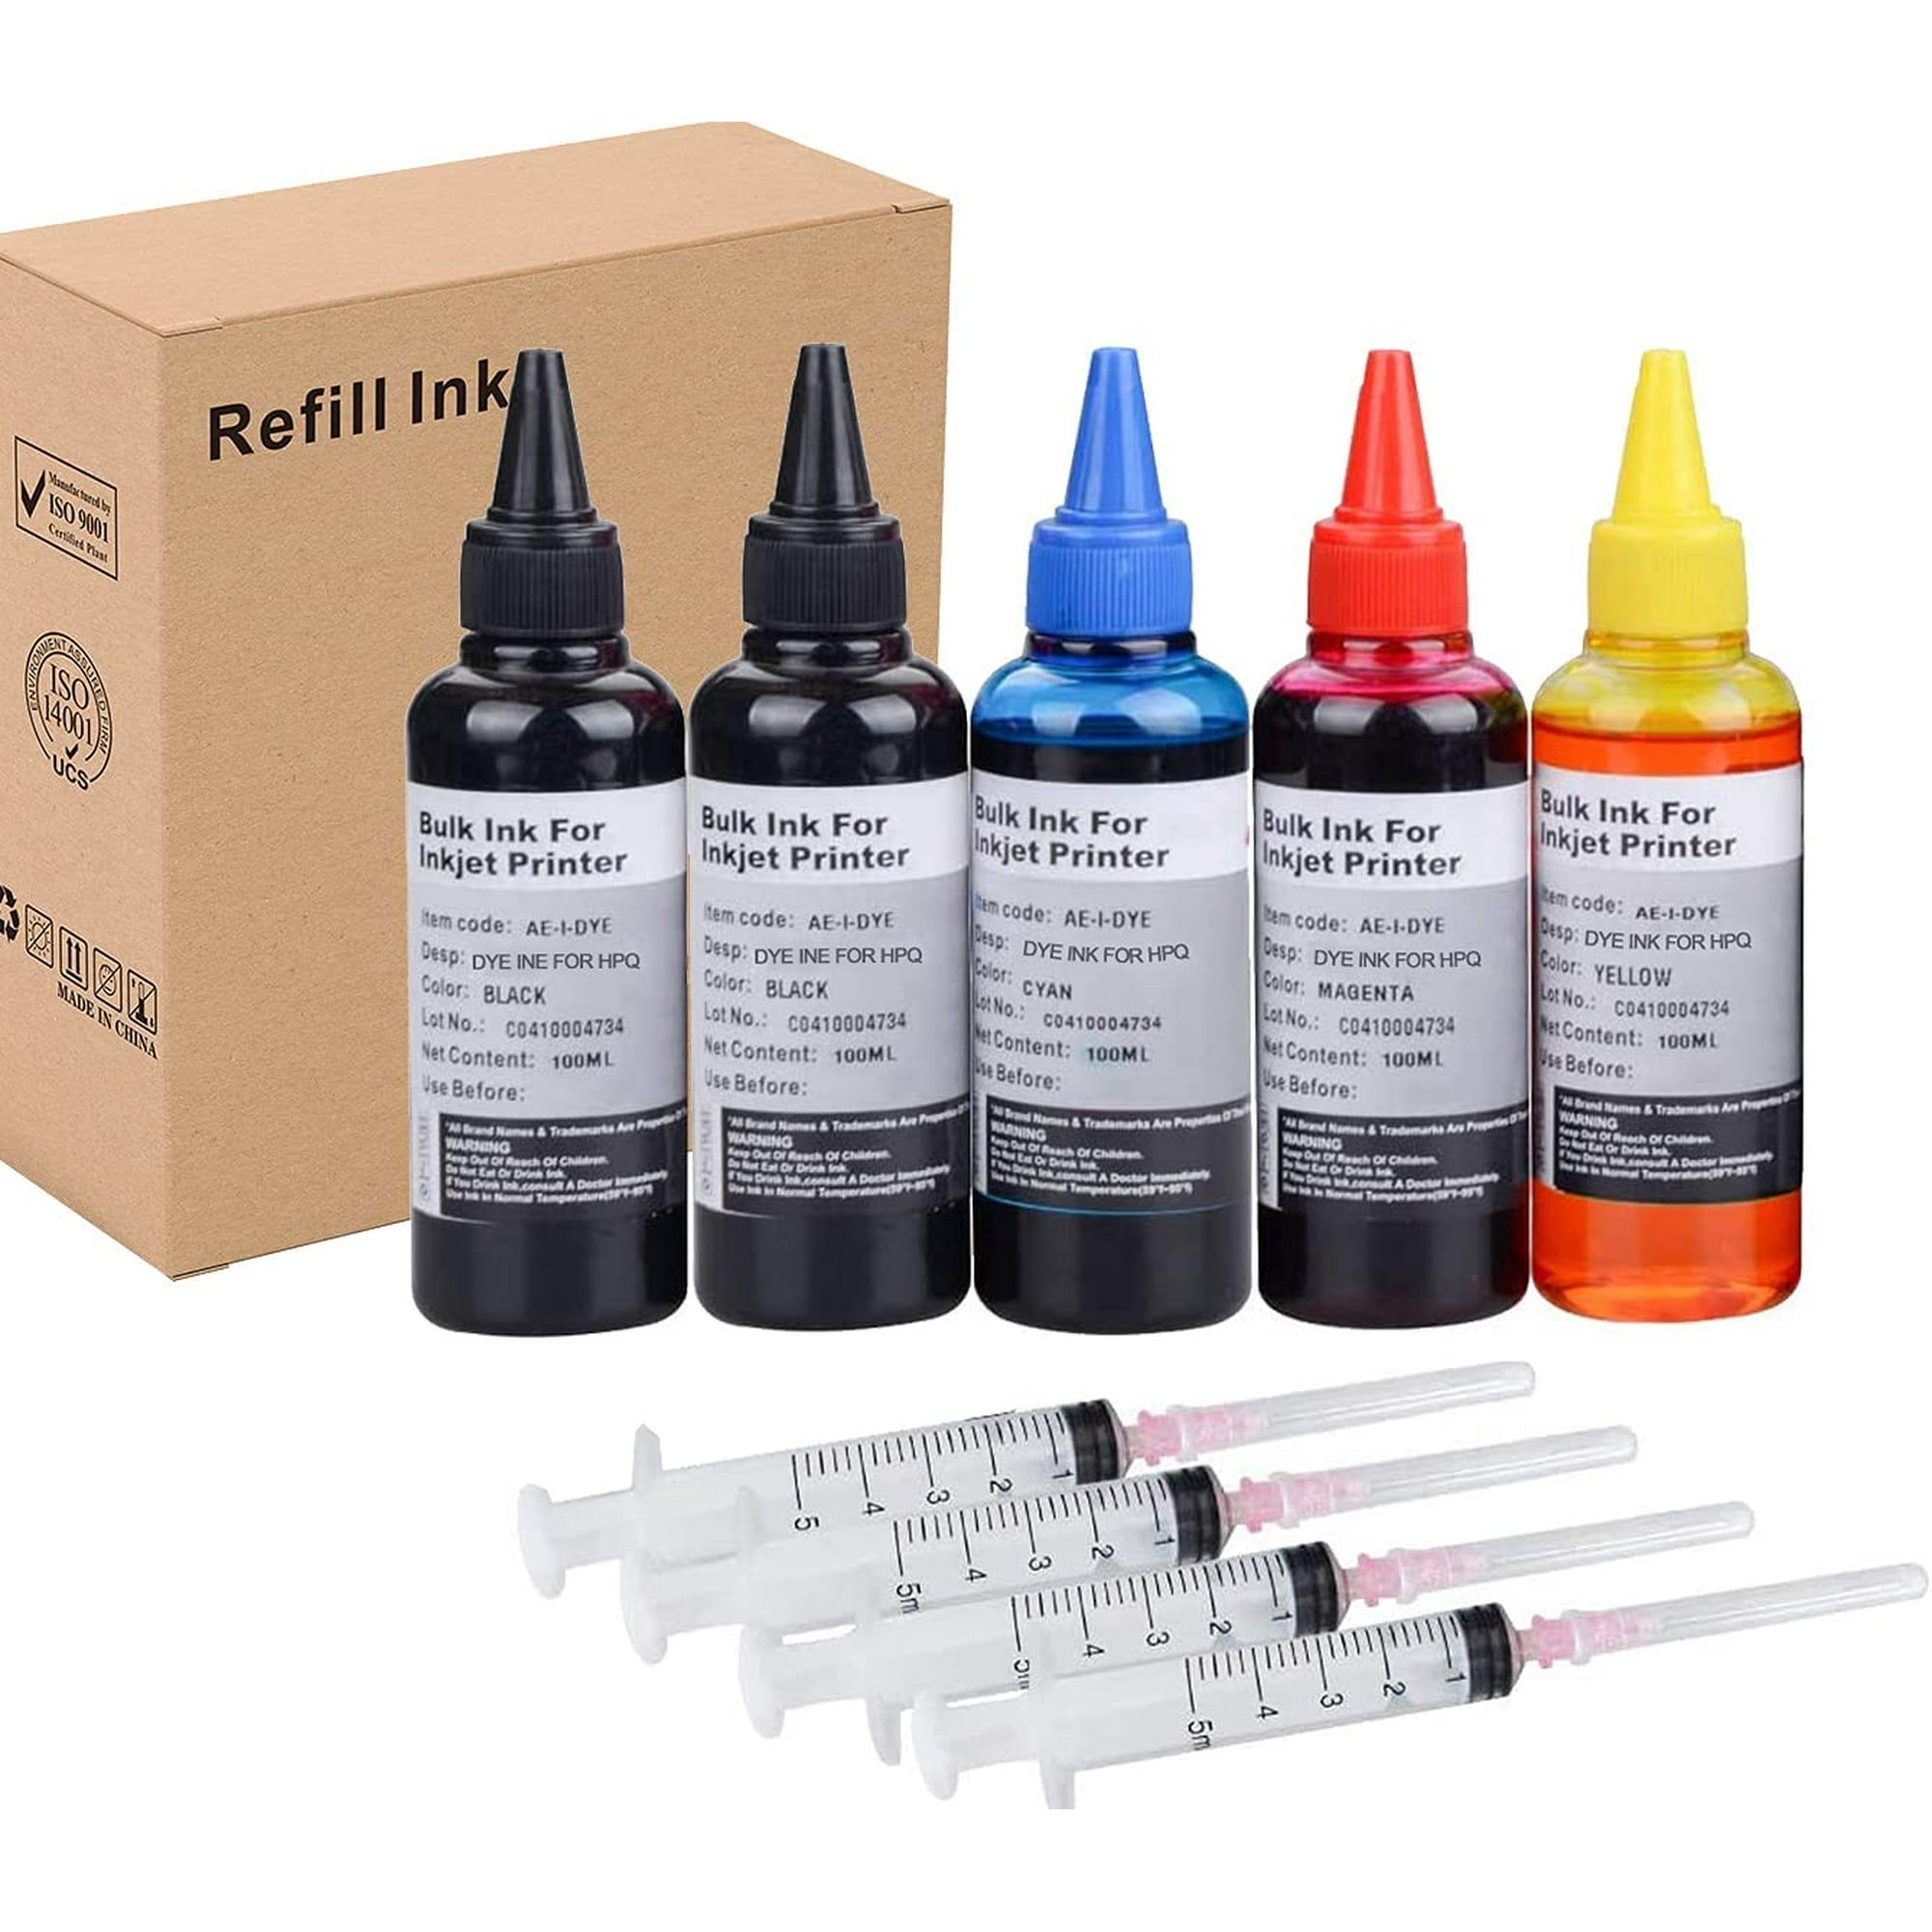 INK+Ink Refill Kit 5x100ml for HP All Models Such as 61 60 62 63 64 65 951 564 920 901 etc Inkjet Printer | Walmart Canada